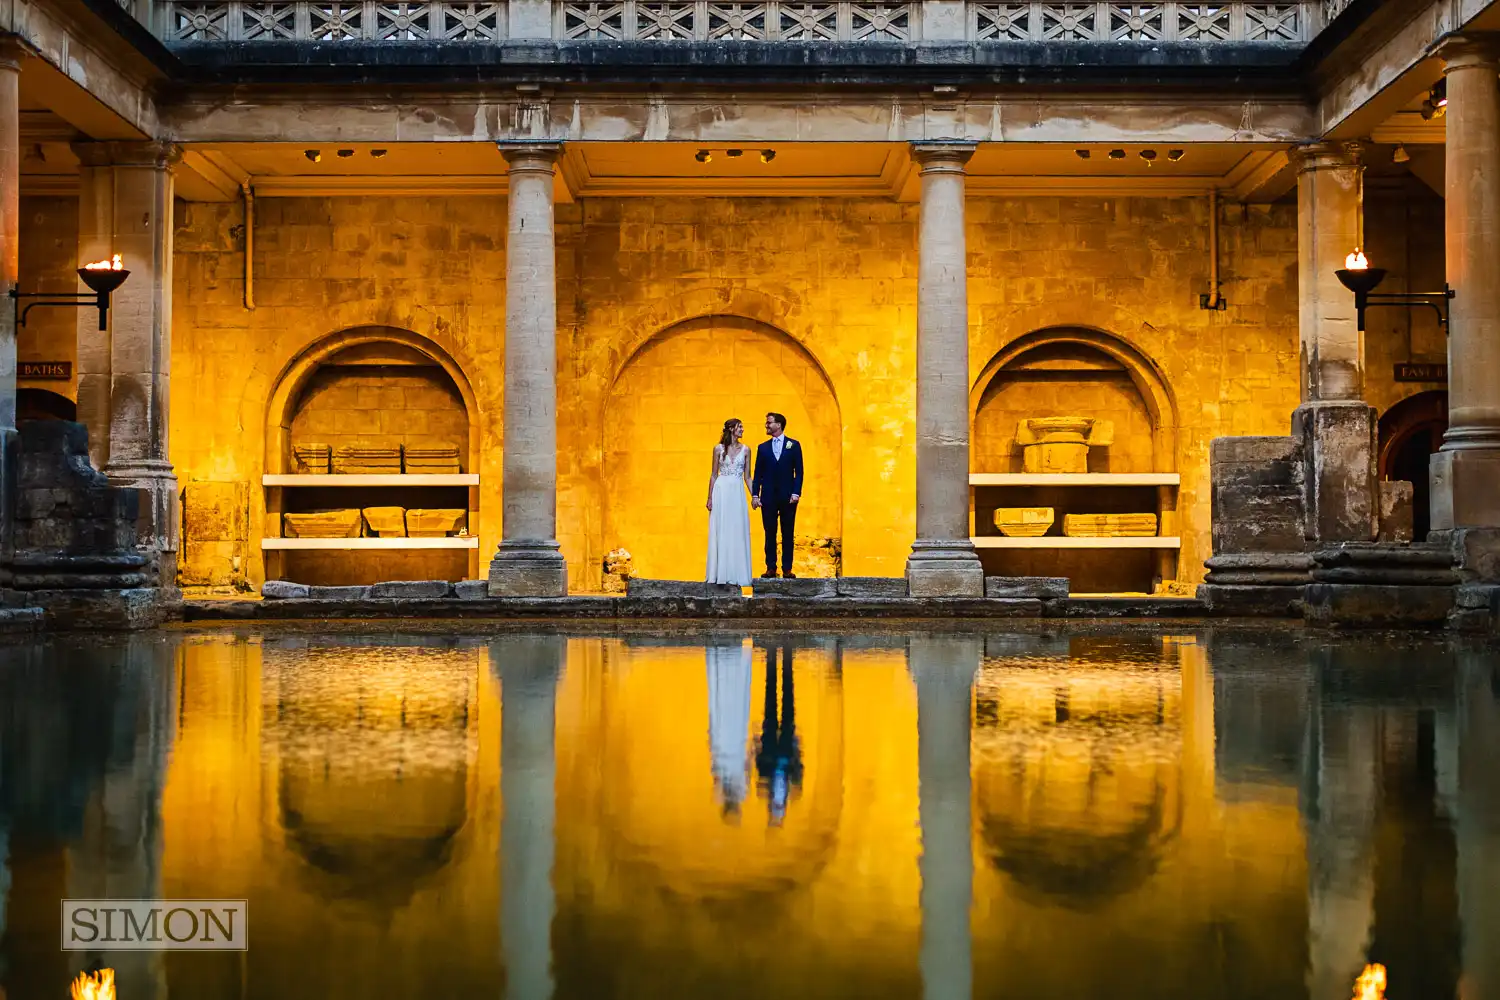 The Pump Rooms and Guildhall in Bath